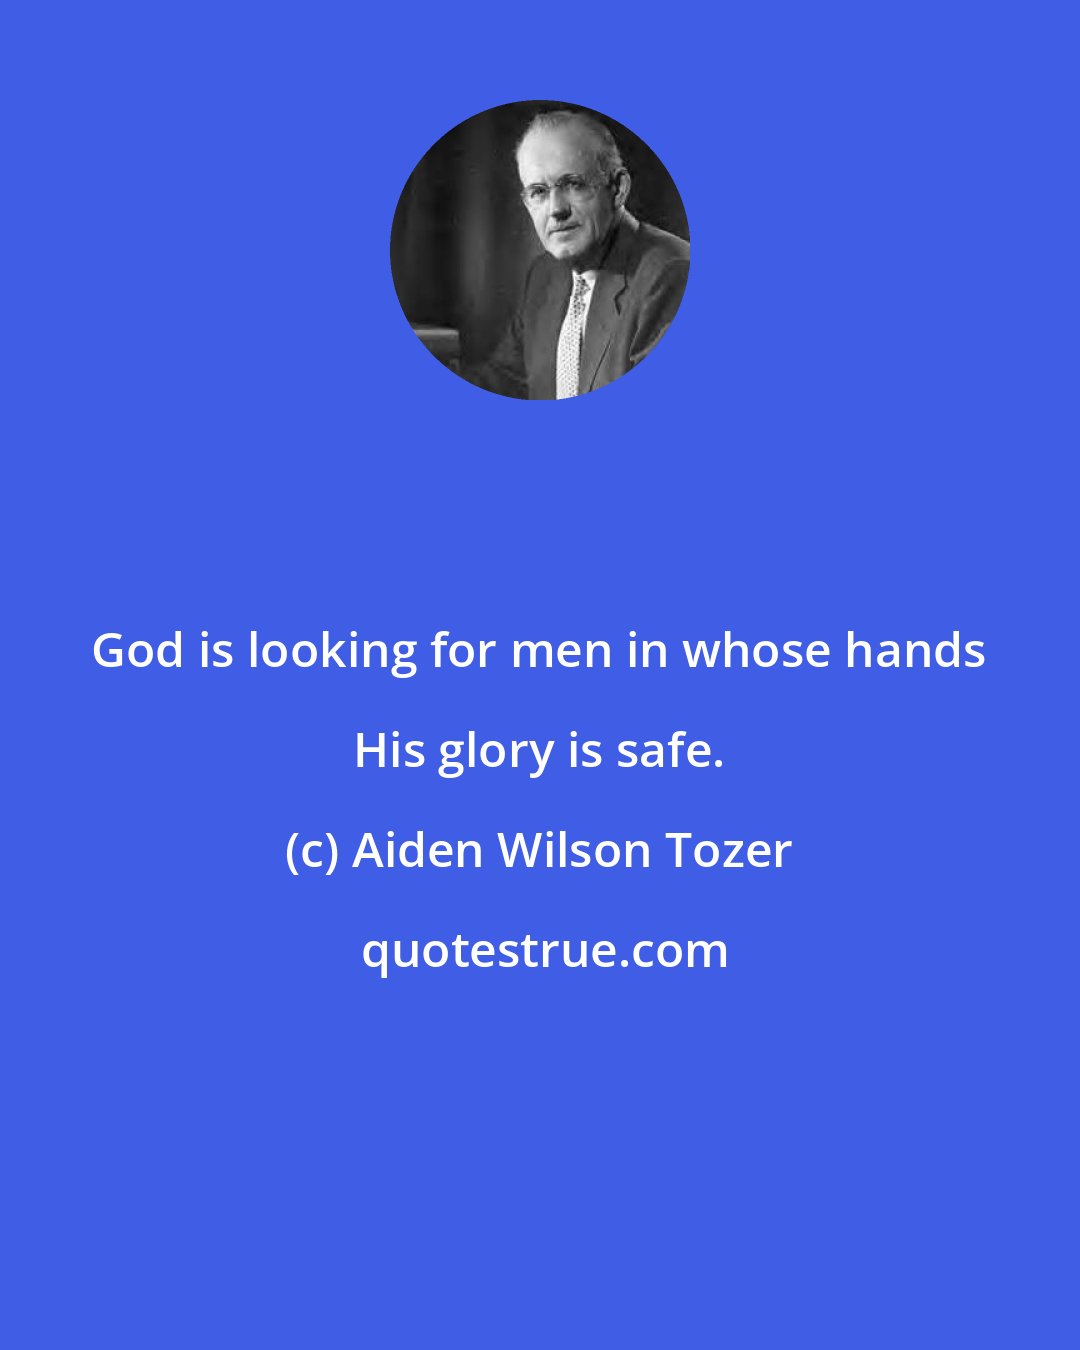 Aiden Wilson Tozer: God is looking for men in whose hands His glory is safe.